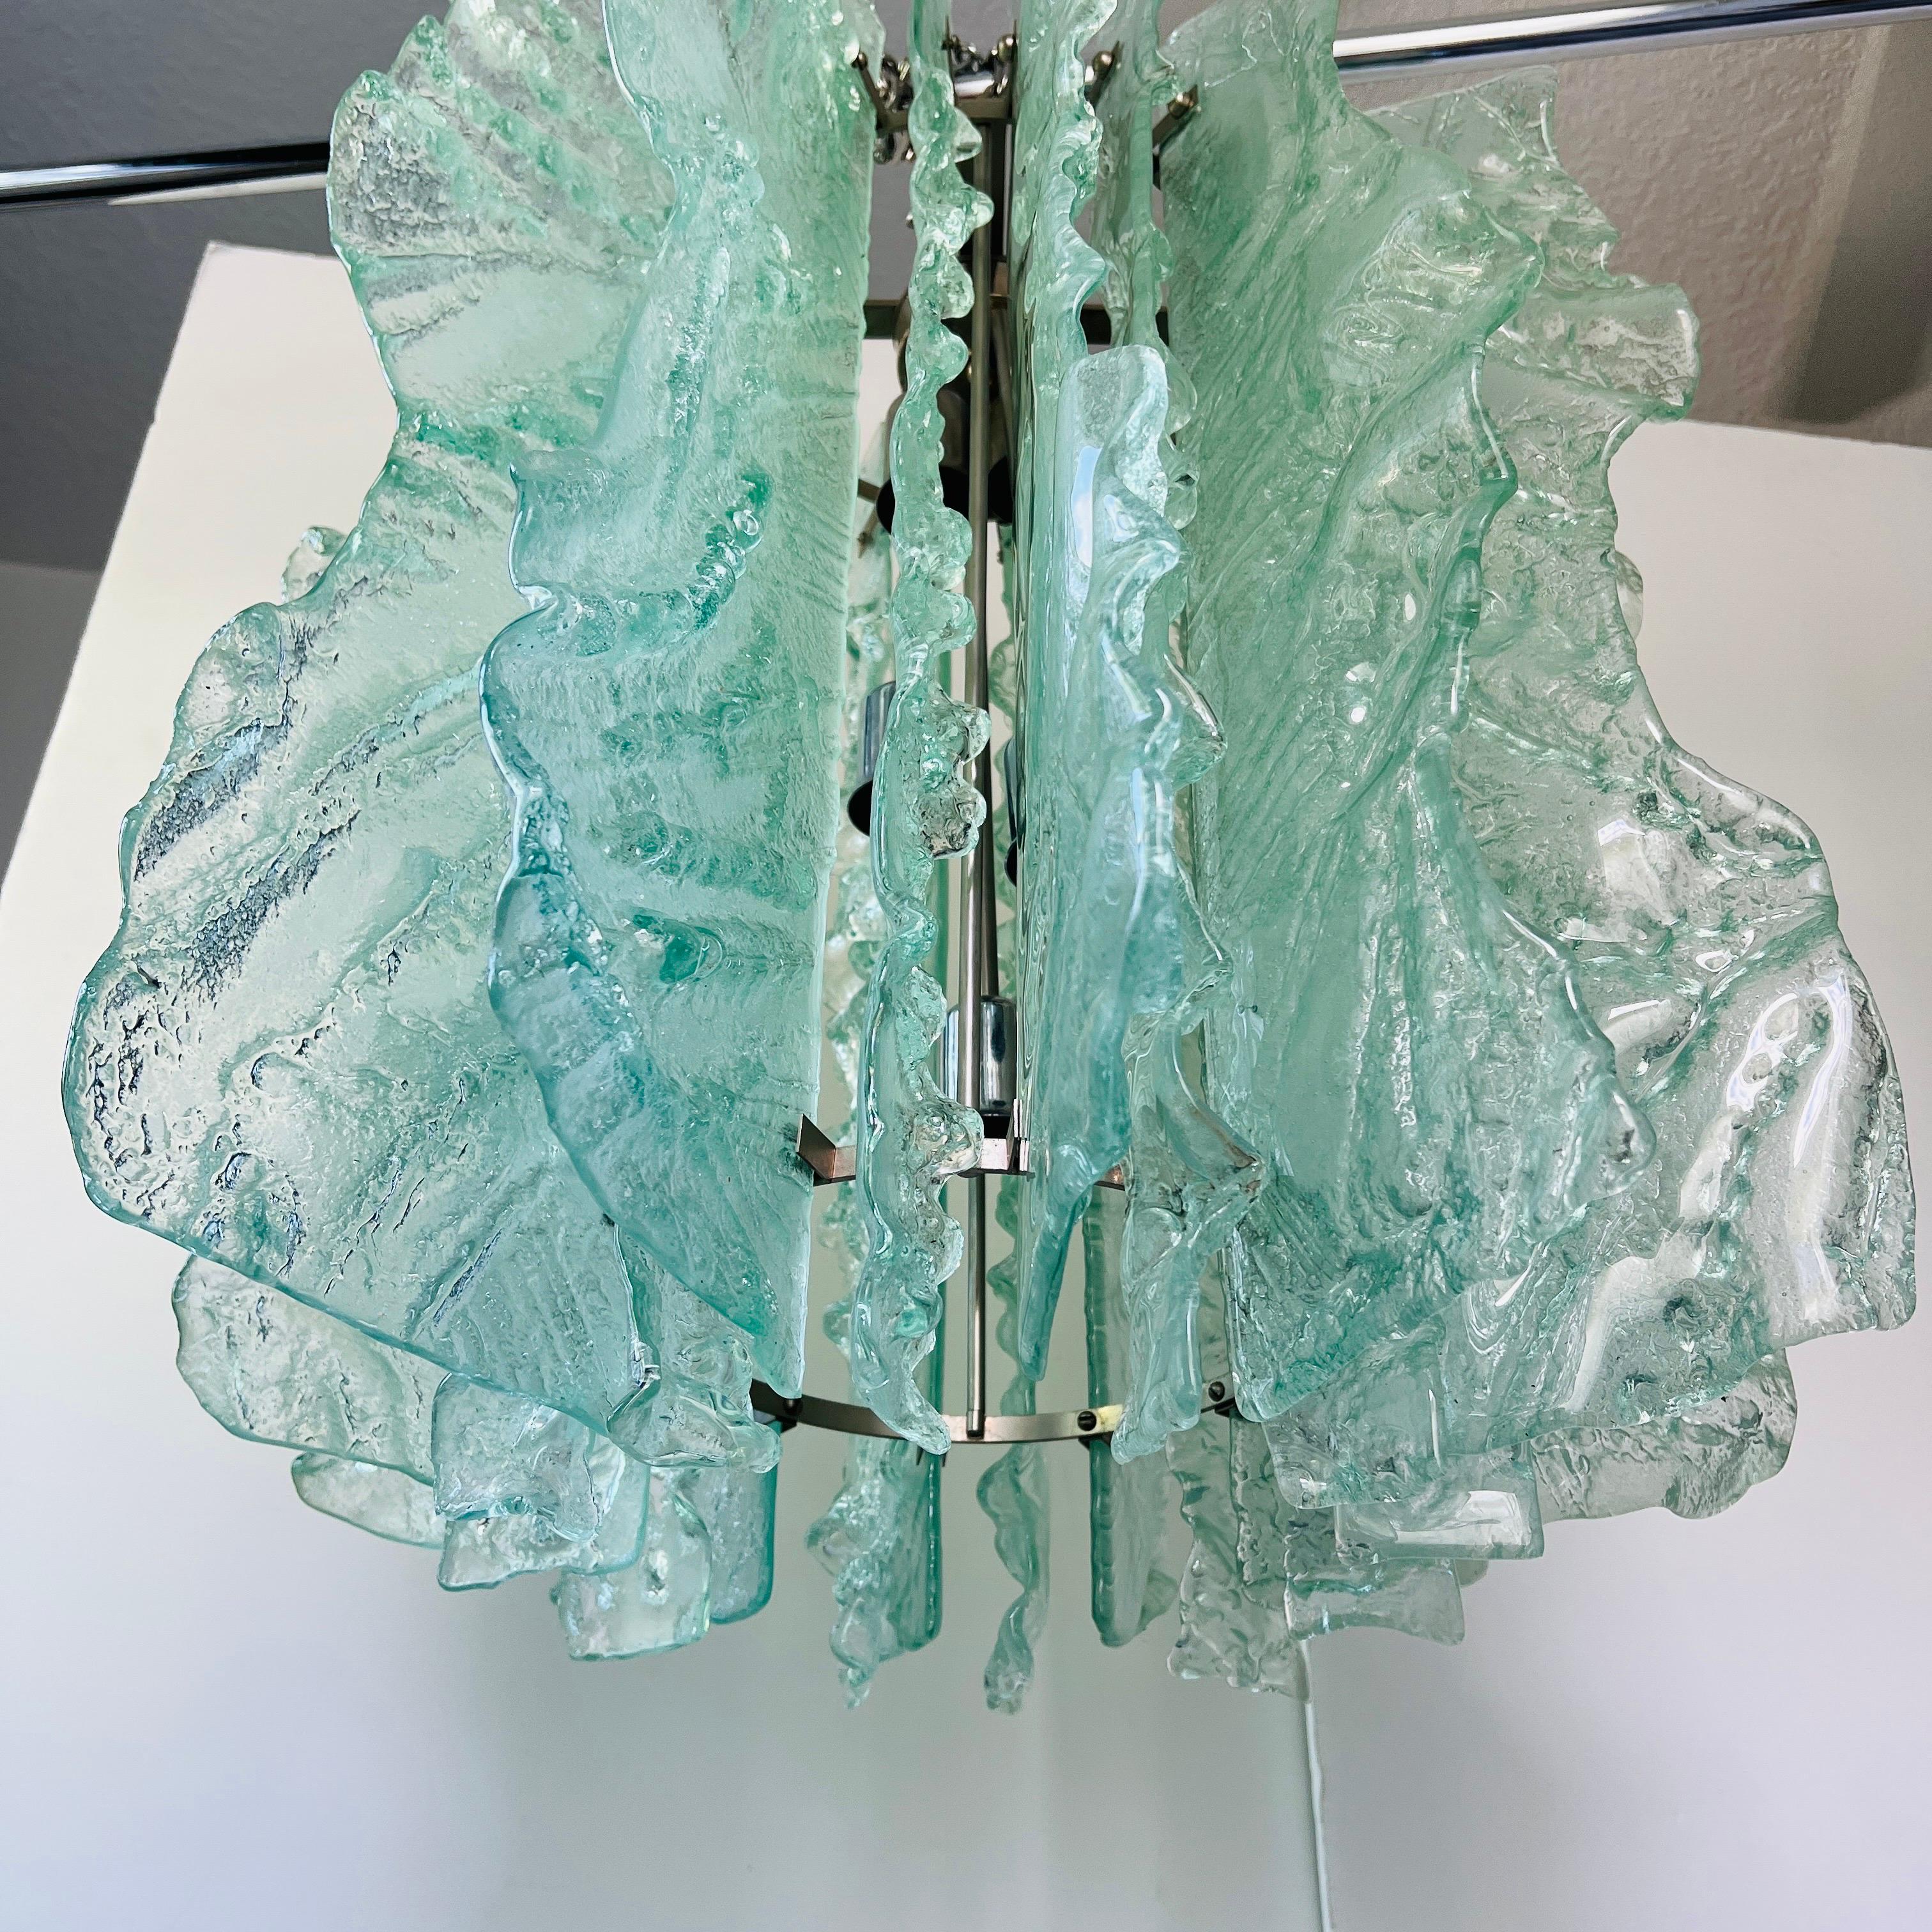 Hand-Crafted Mid-Century Modern Murano Glass Leaf Chandelier in Light Aqua, Israel c. 1970's For Sale